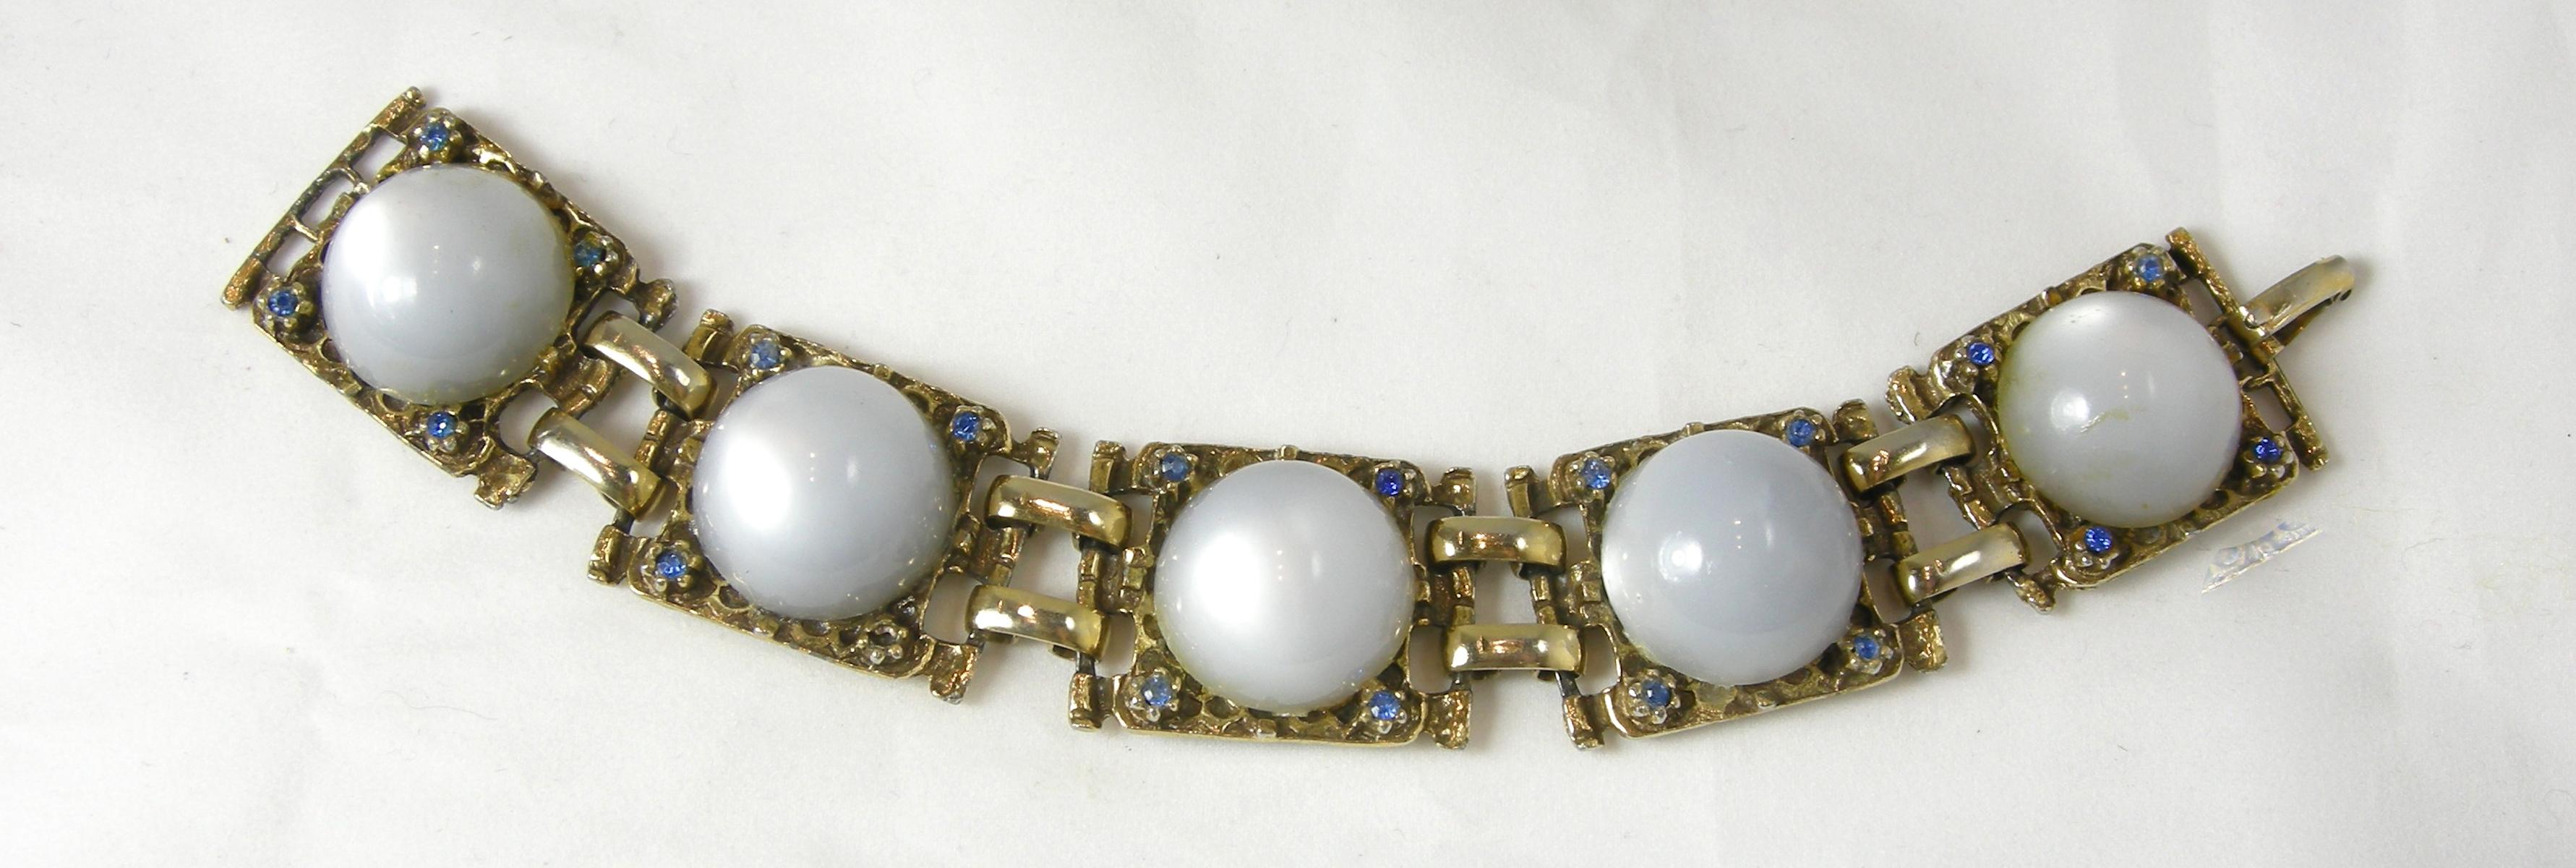 This vintage bracelet has large cabochon faux moonstones with blue crystal accents in a gold tone setting.  In excellent condition, this bracelet measures 7-1/2” x 1” with a fold-over clasp.